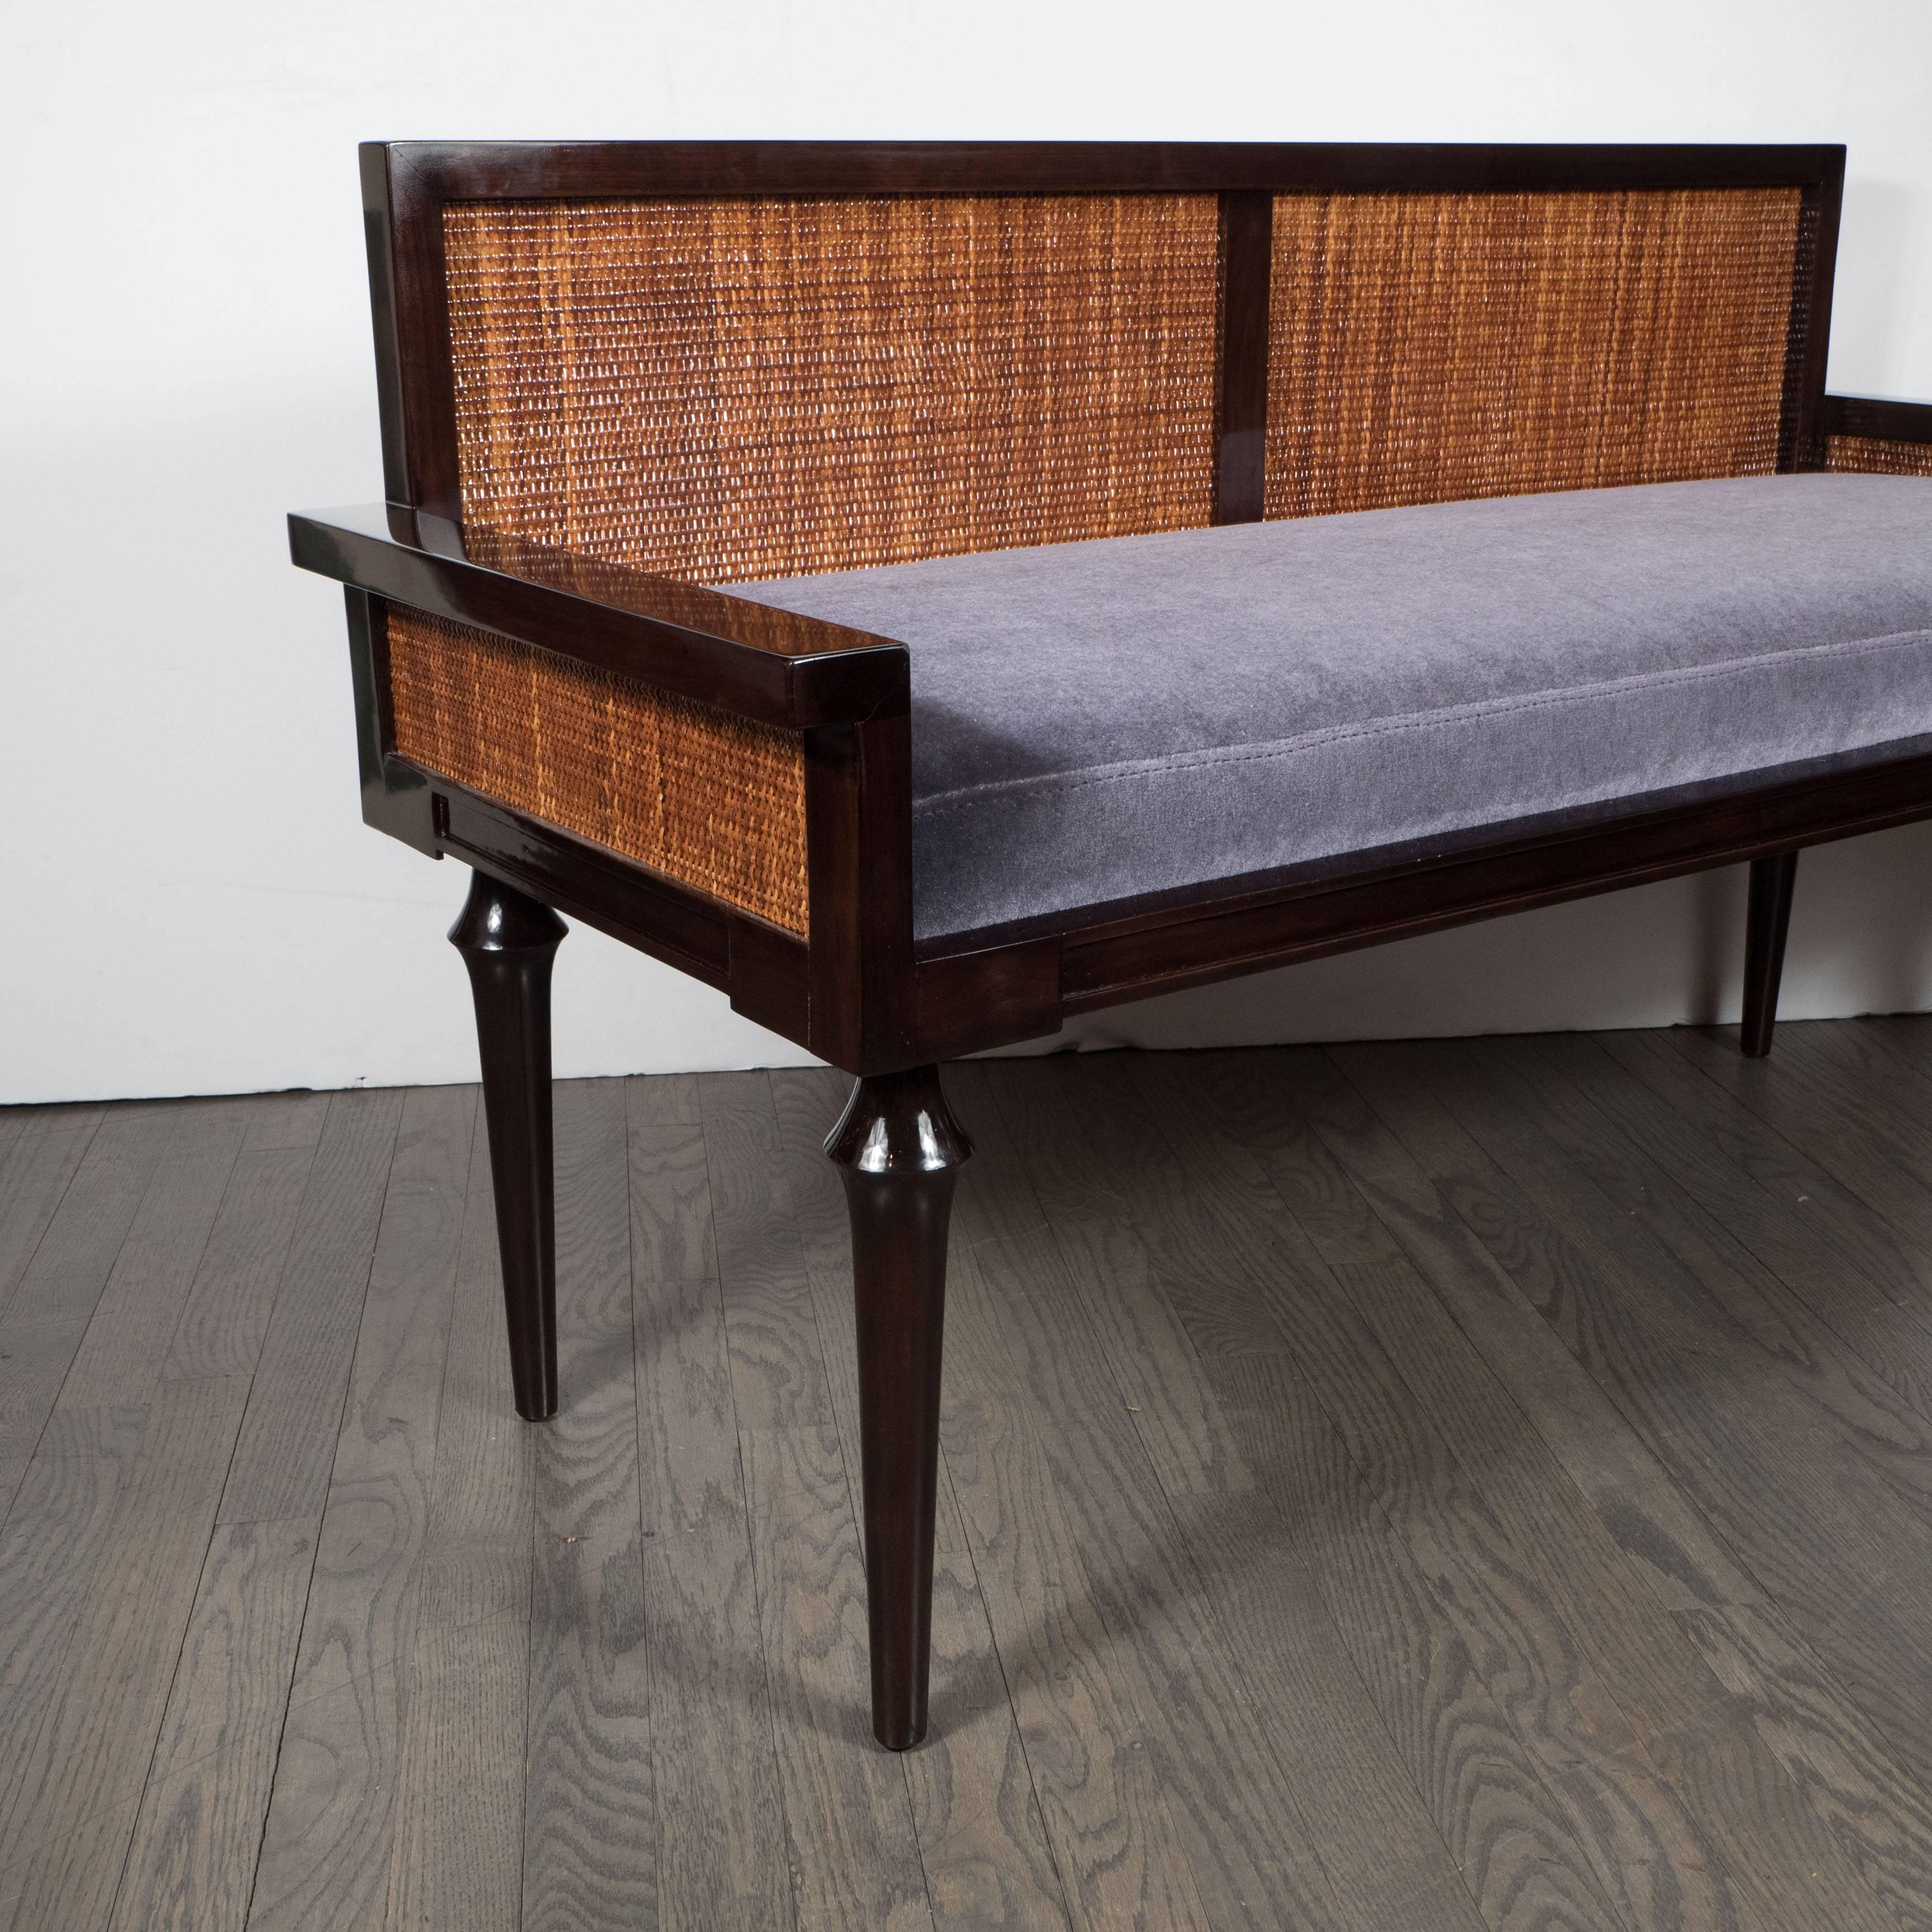 Mid-20th Century Mid-Century Modernist Bench in Ebonized Walnut with Inset Caning and Mohair